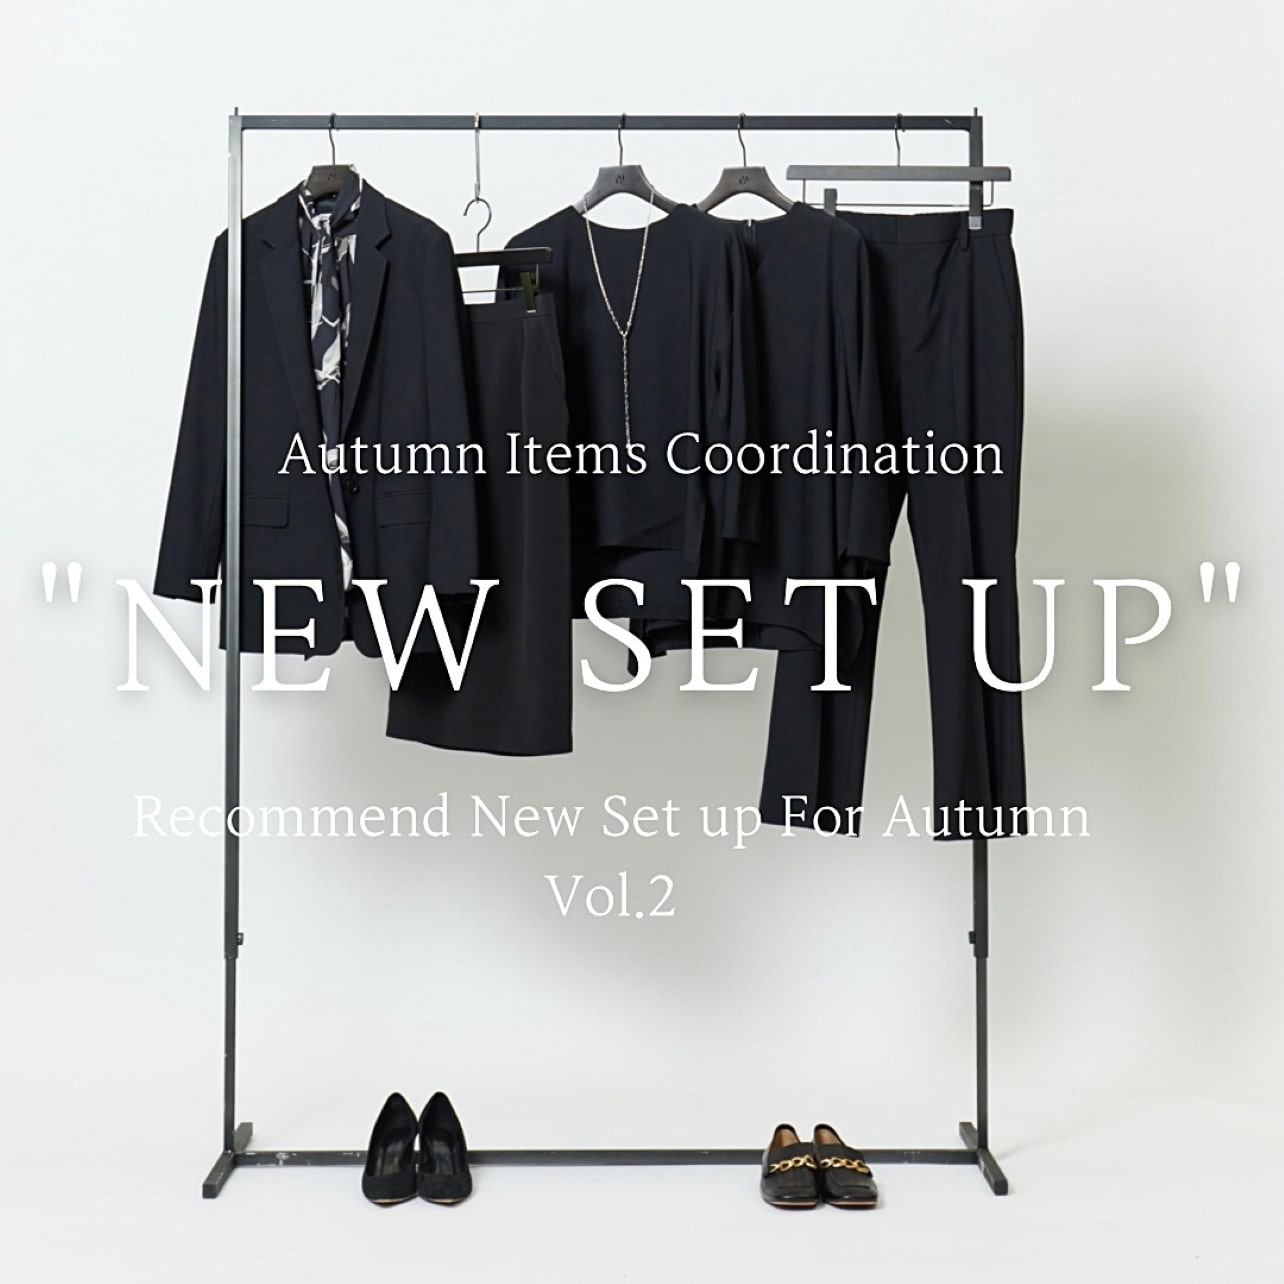 Recommend Items Styling "NEW SET UP" Vol.2